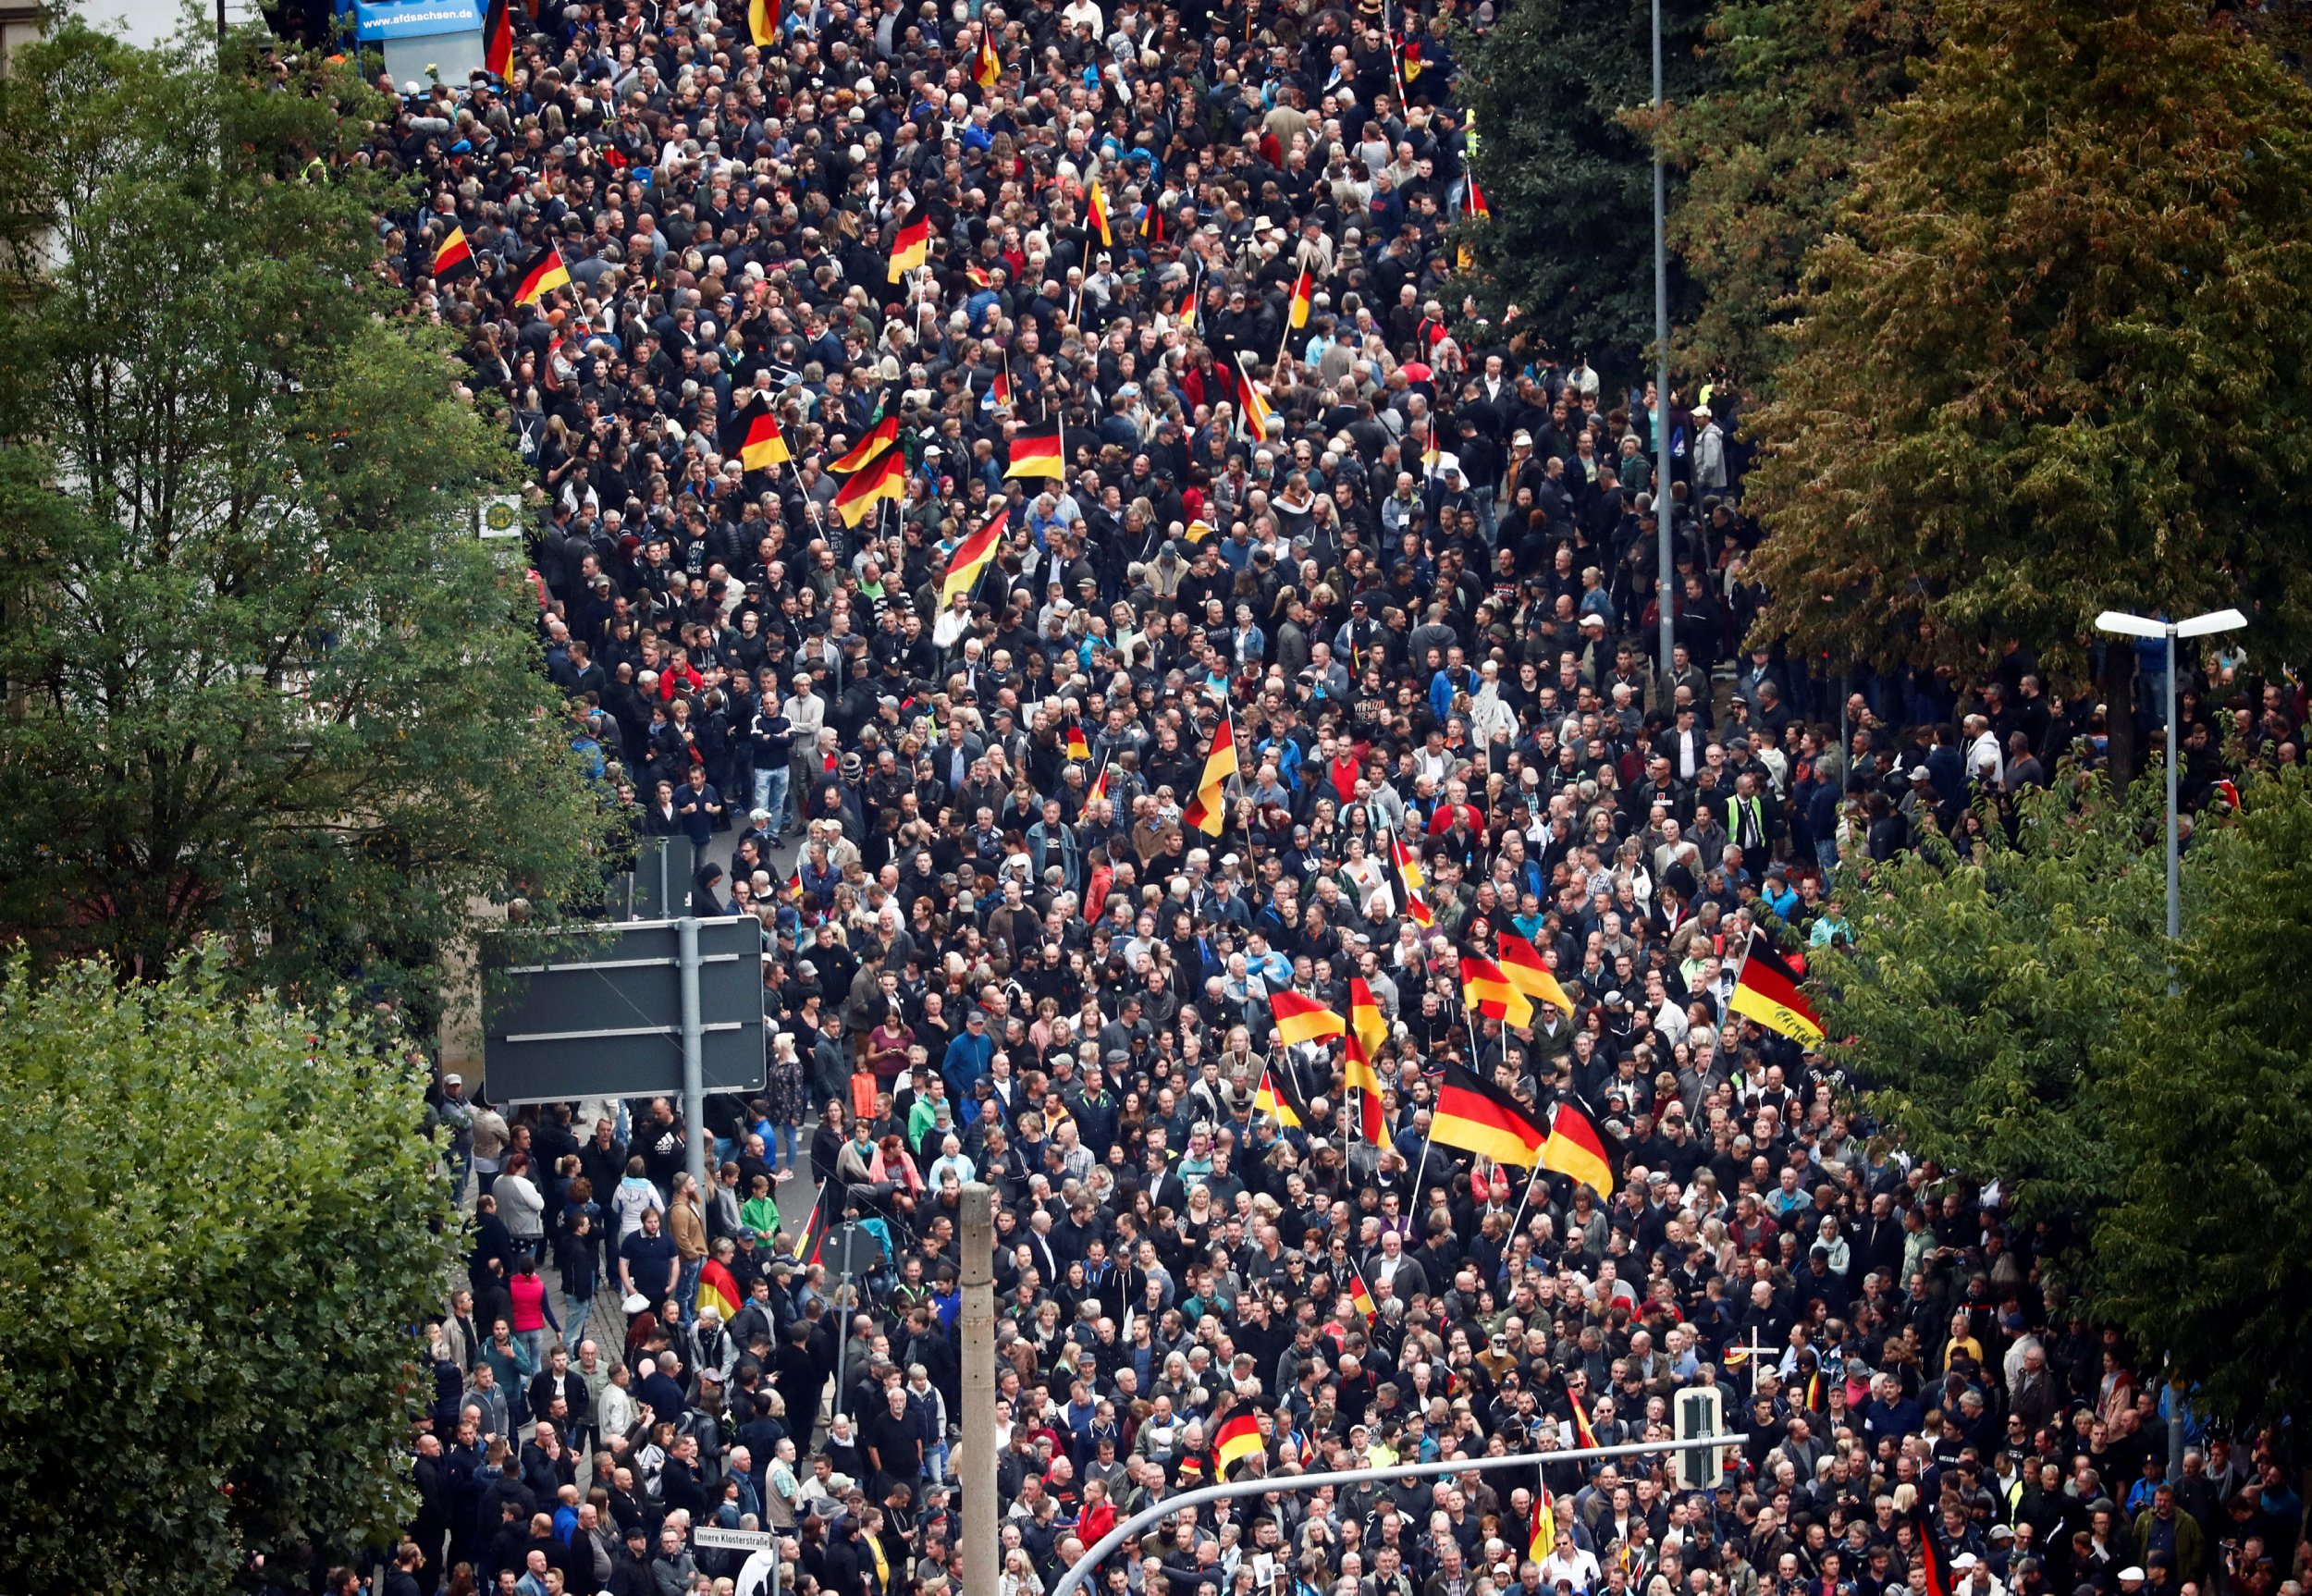 Nine Injured After Immigration Clashes in Germany